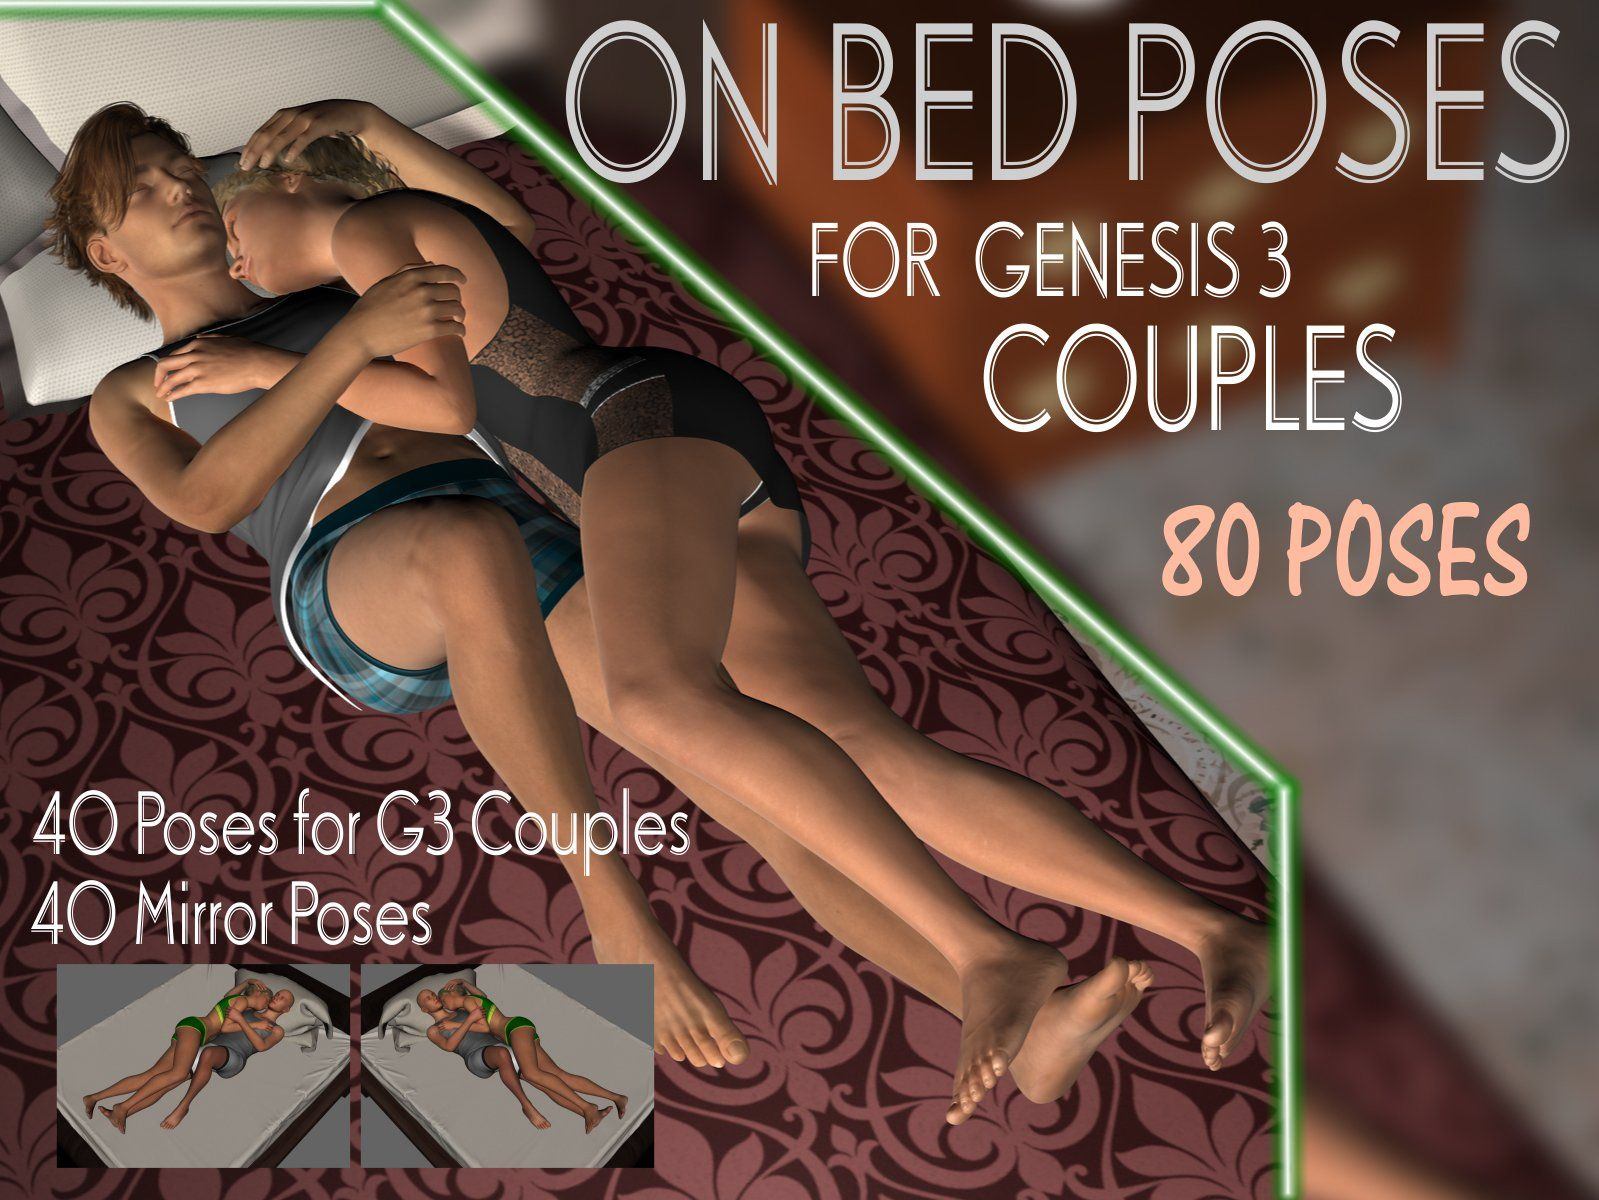 Pornographic poses for couples